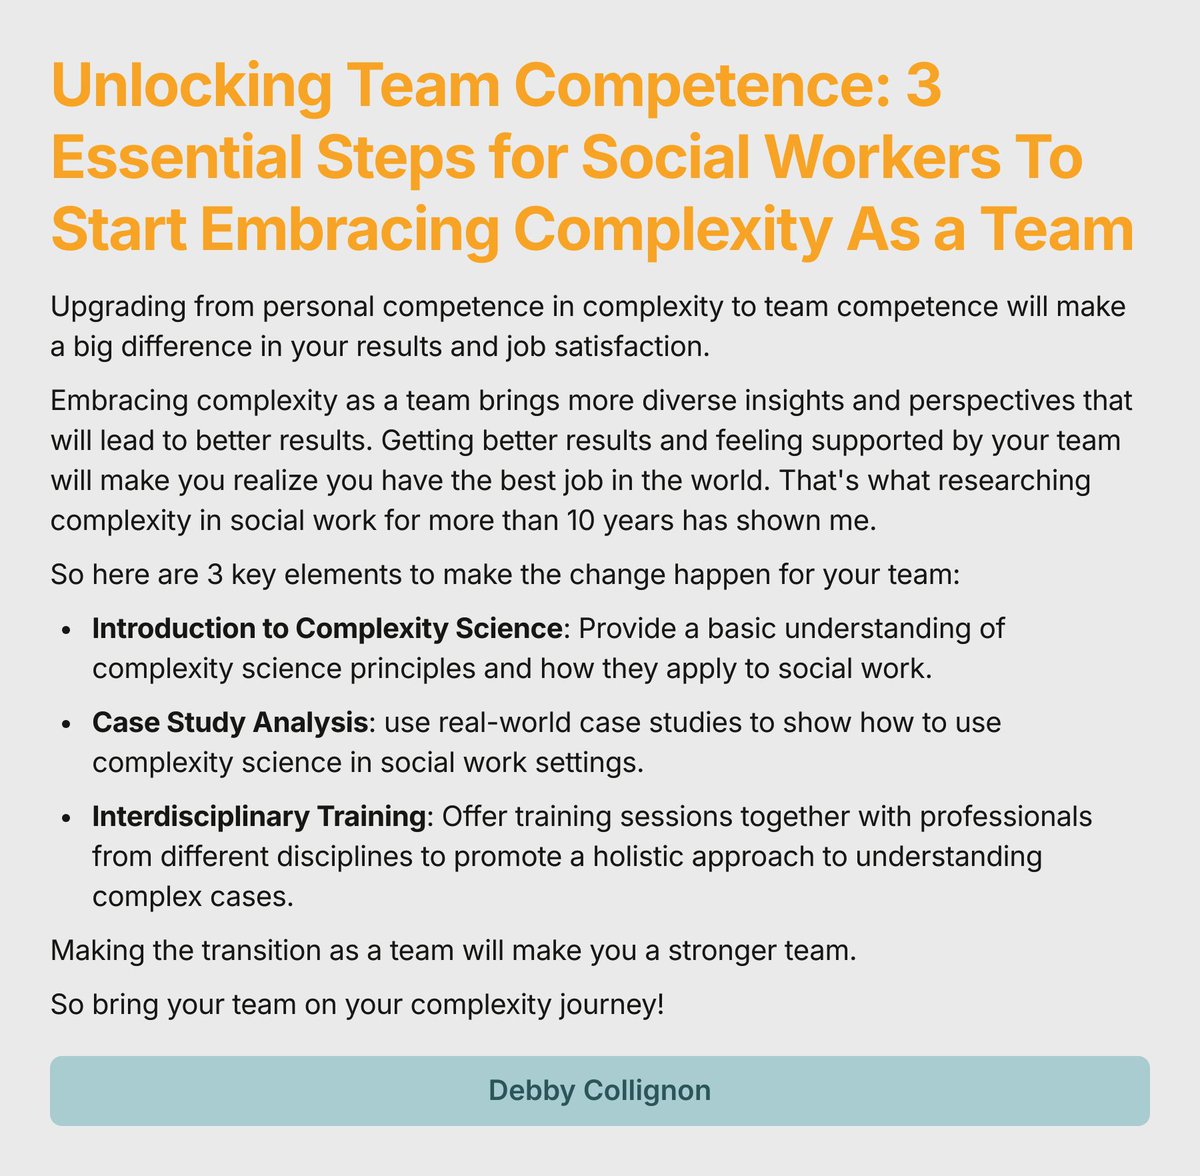 Unlocking Team Competence: 3 Essential Steps for Social Workers To Start Embracing Complexity As a Team
#SocialWork #SocialWorkSuccess #TeamCompetence #EmbraceComplexity #JobSatisfaction #Teamwork #SocialWorkJourney #ComplexityScience #ProfessionalDevelopment #CaseStudyAnalysis